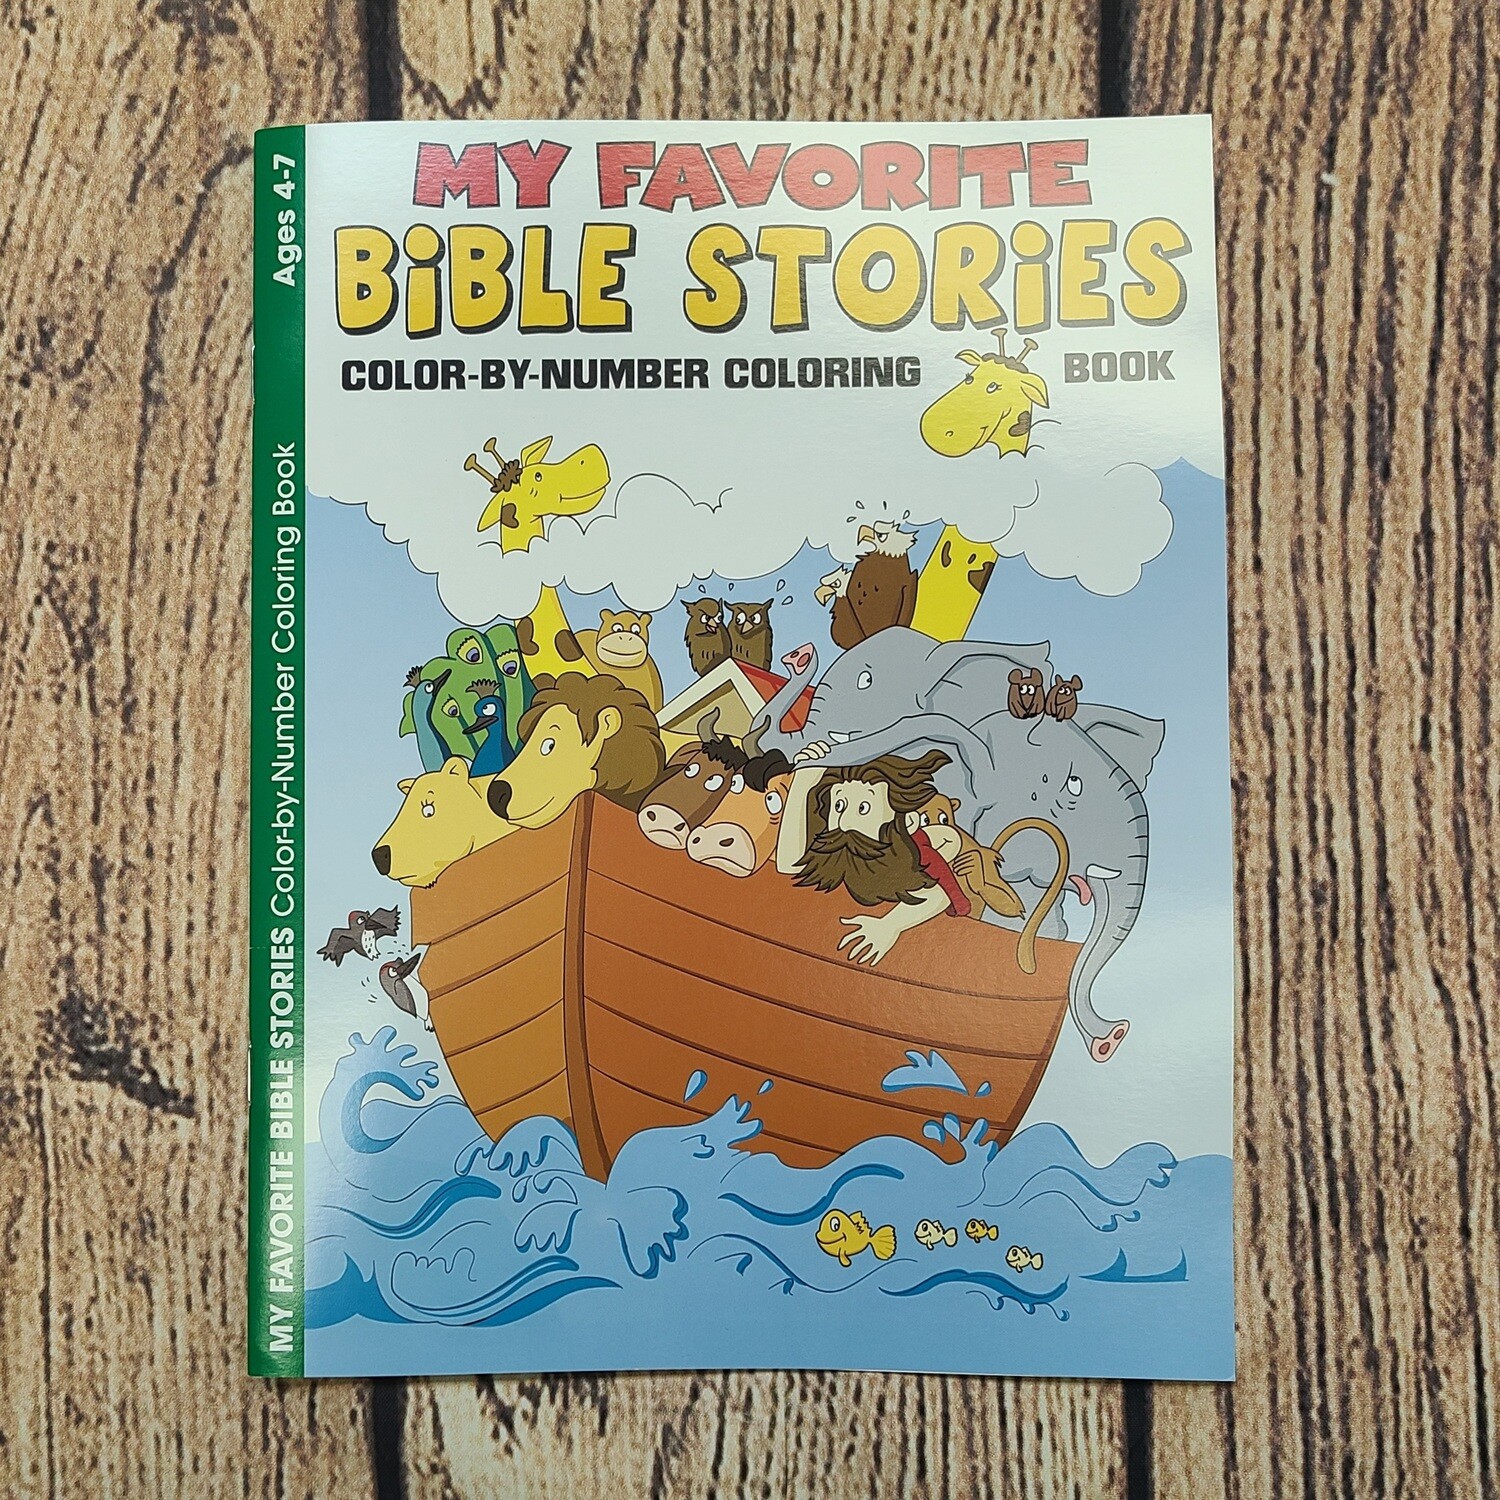 My Favorite Bible Stories Color-By-Number Coloring Book